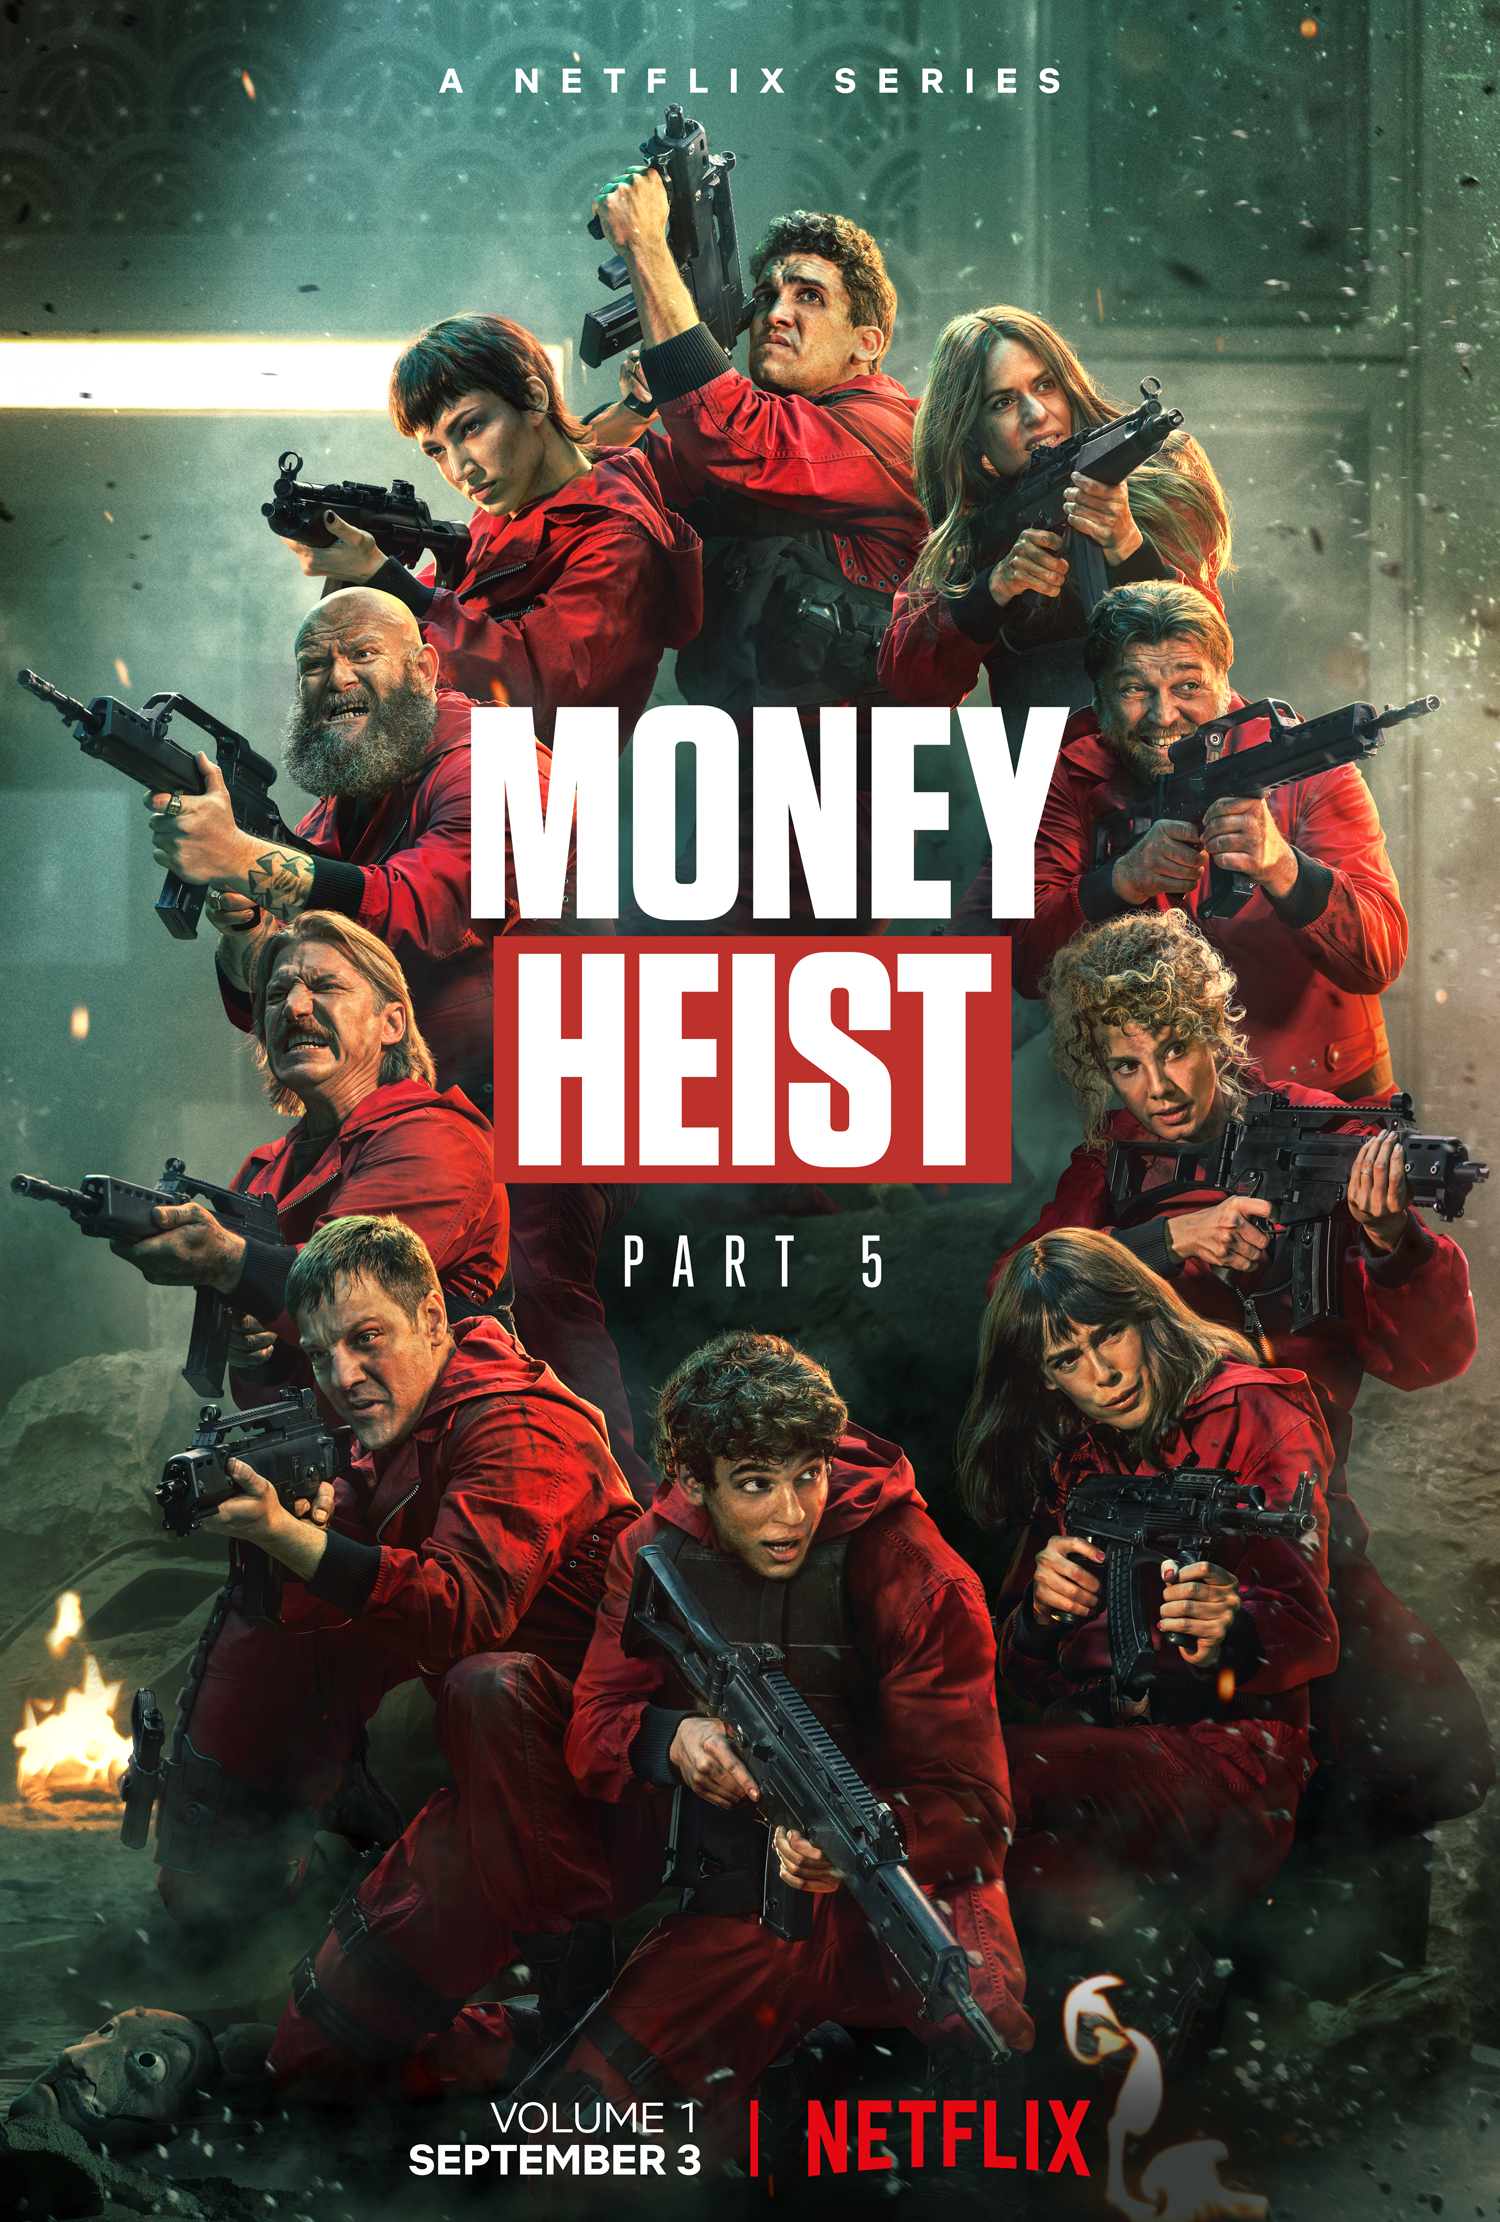 The Success of ‘Money Heist’ From A Non - Viewer POV